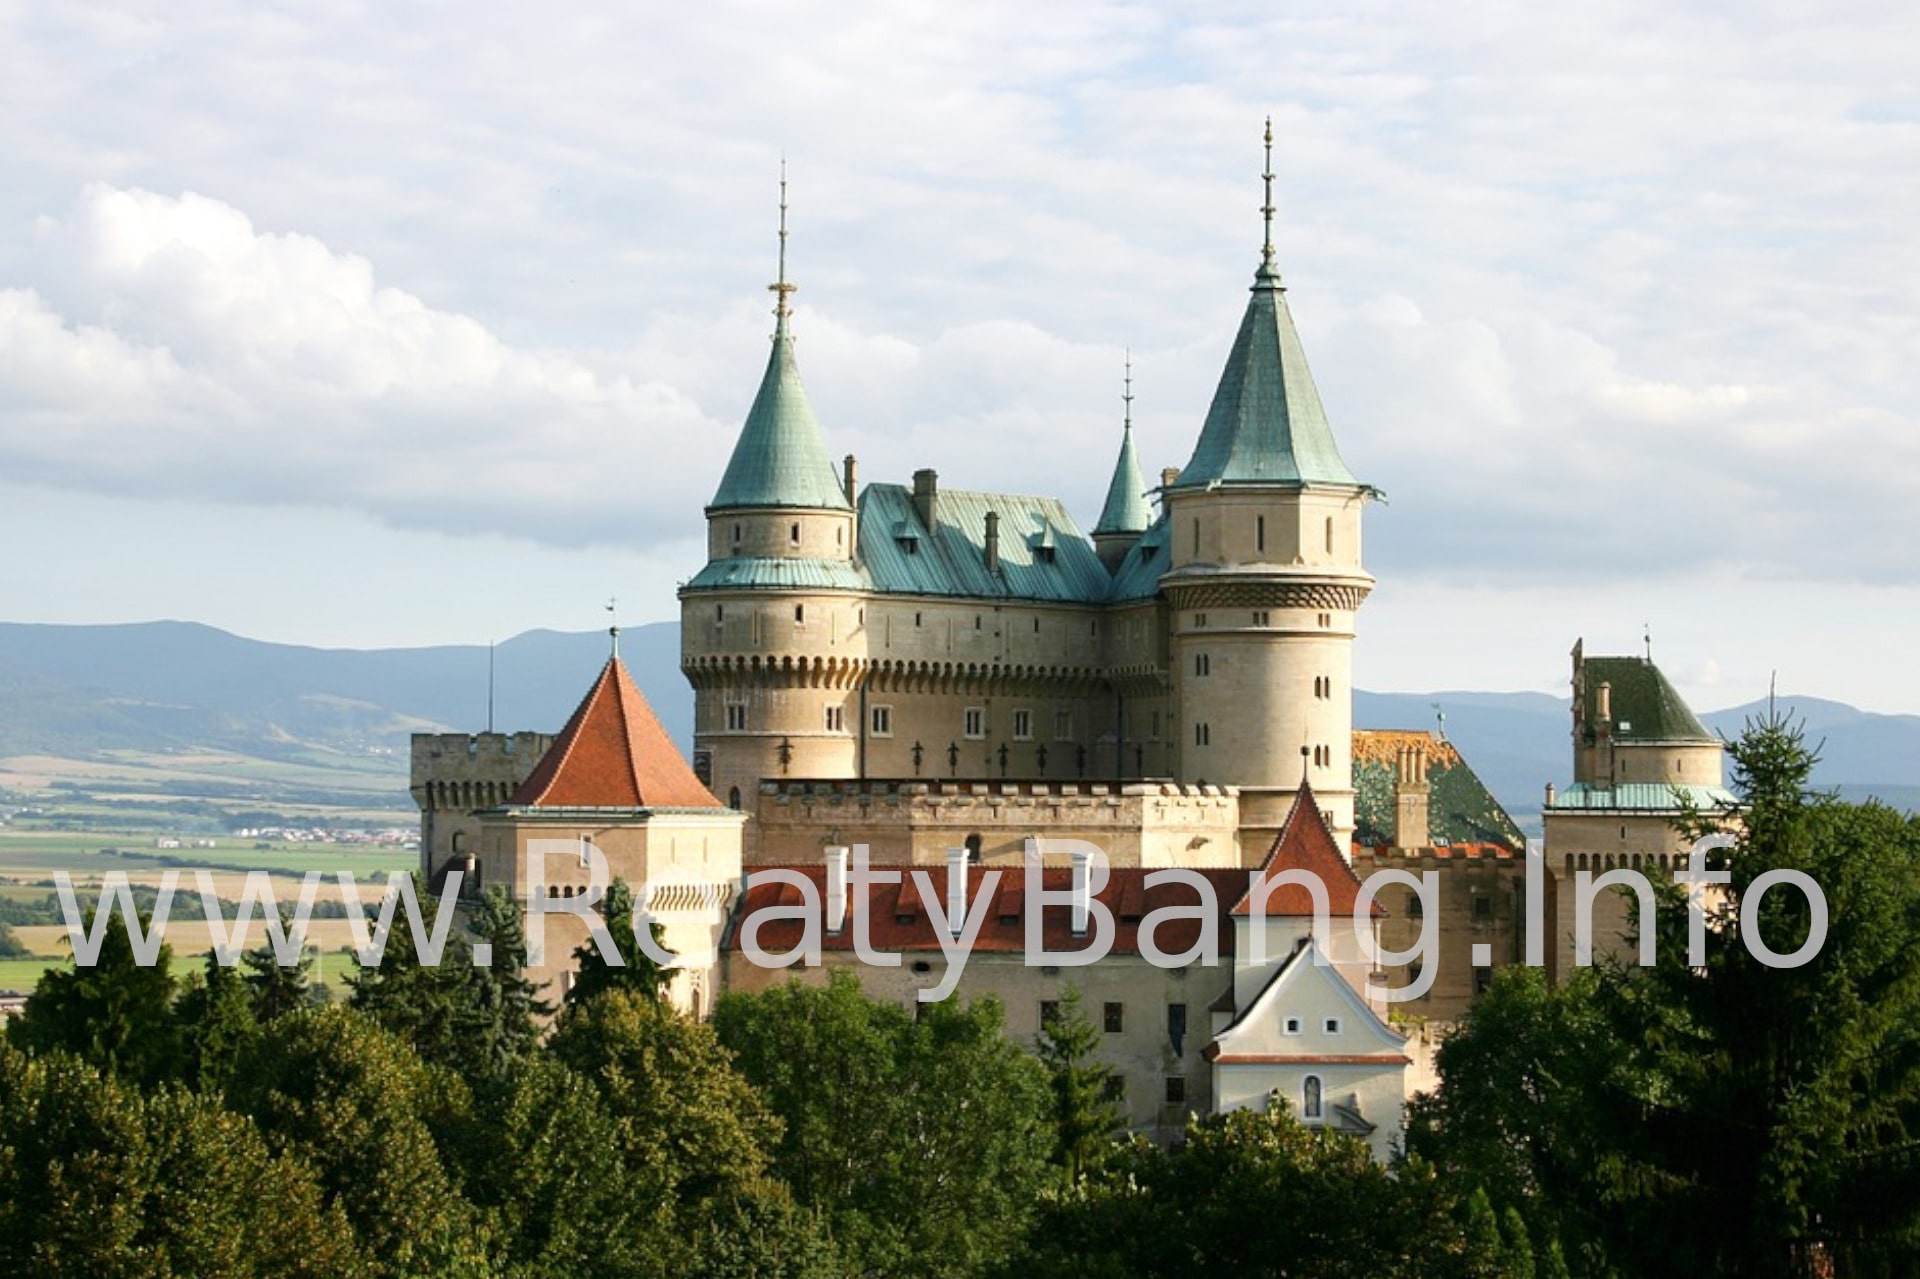 Rent or Buy Real Estate in Slovakia